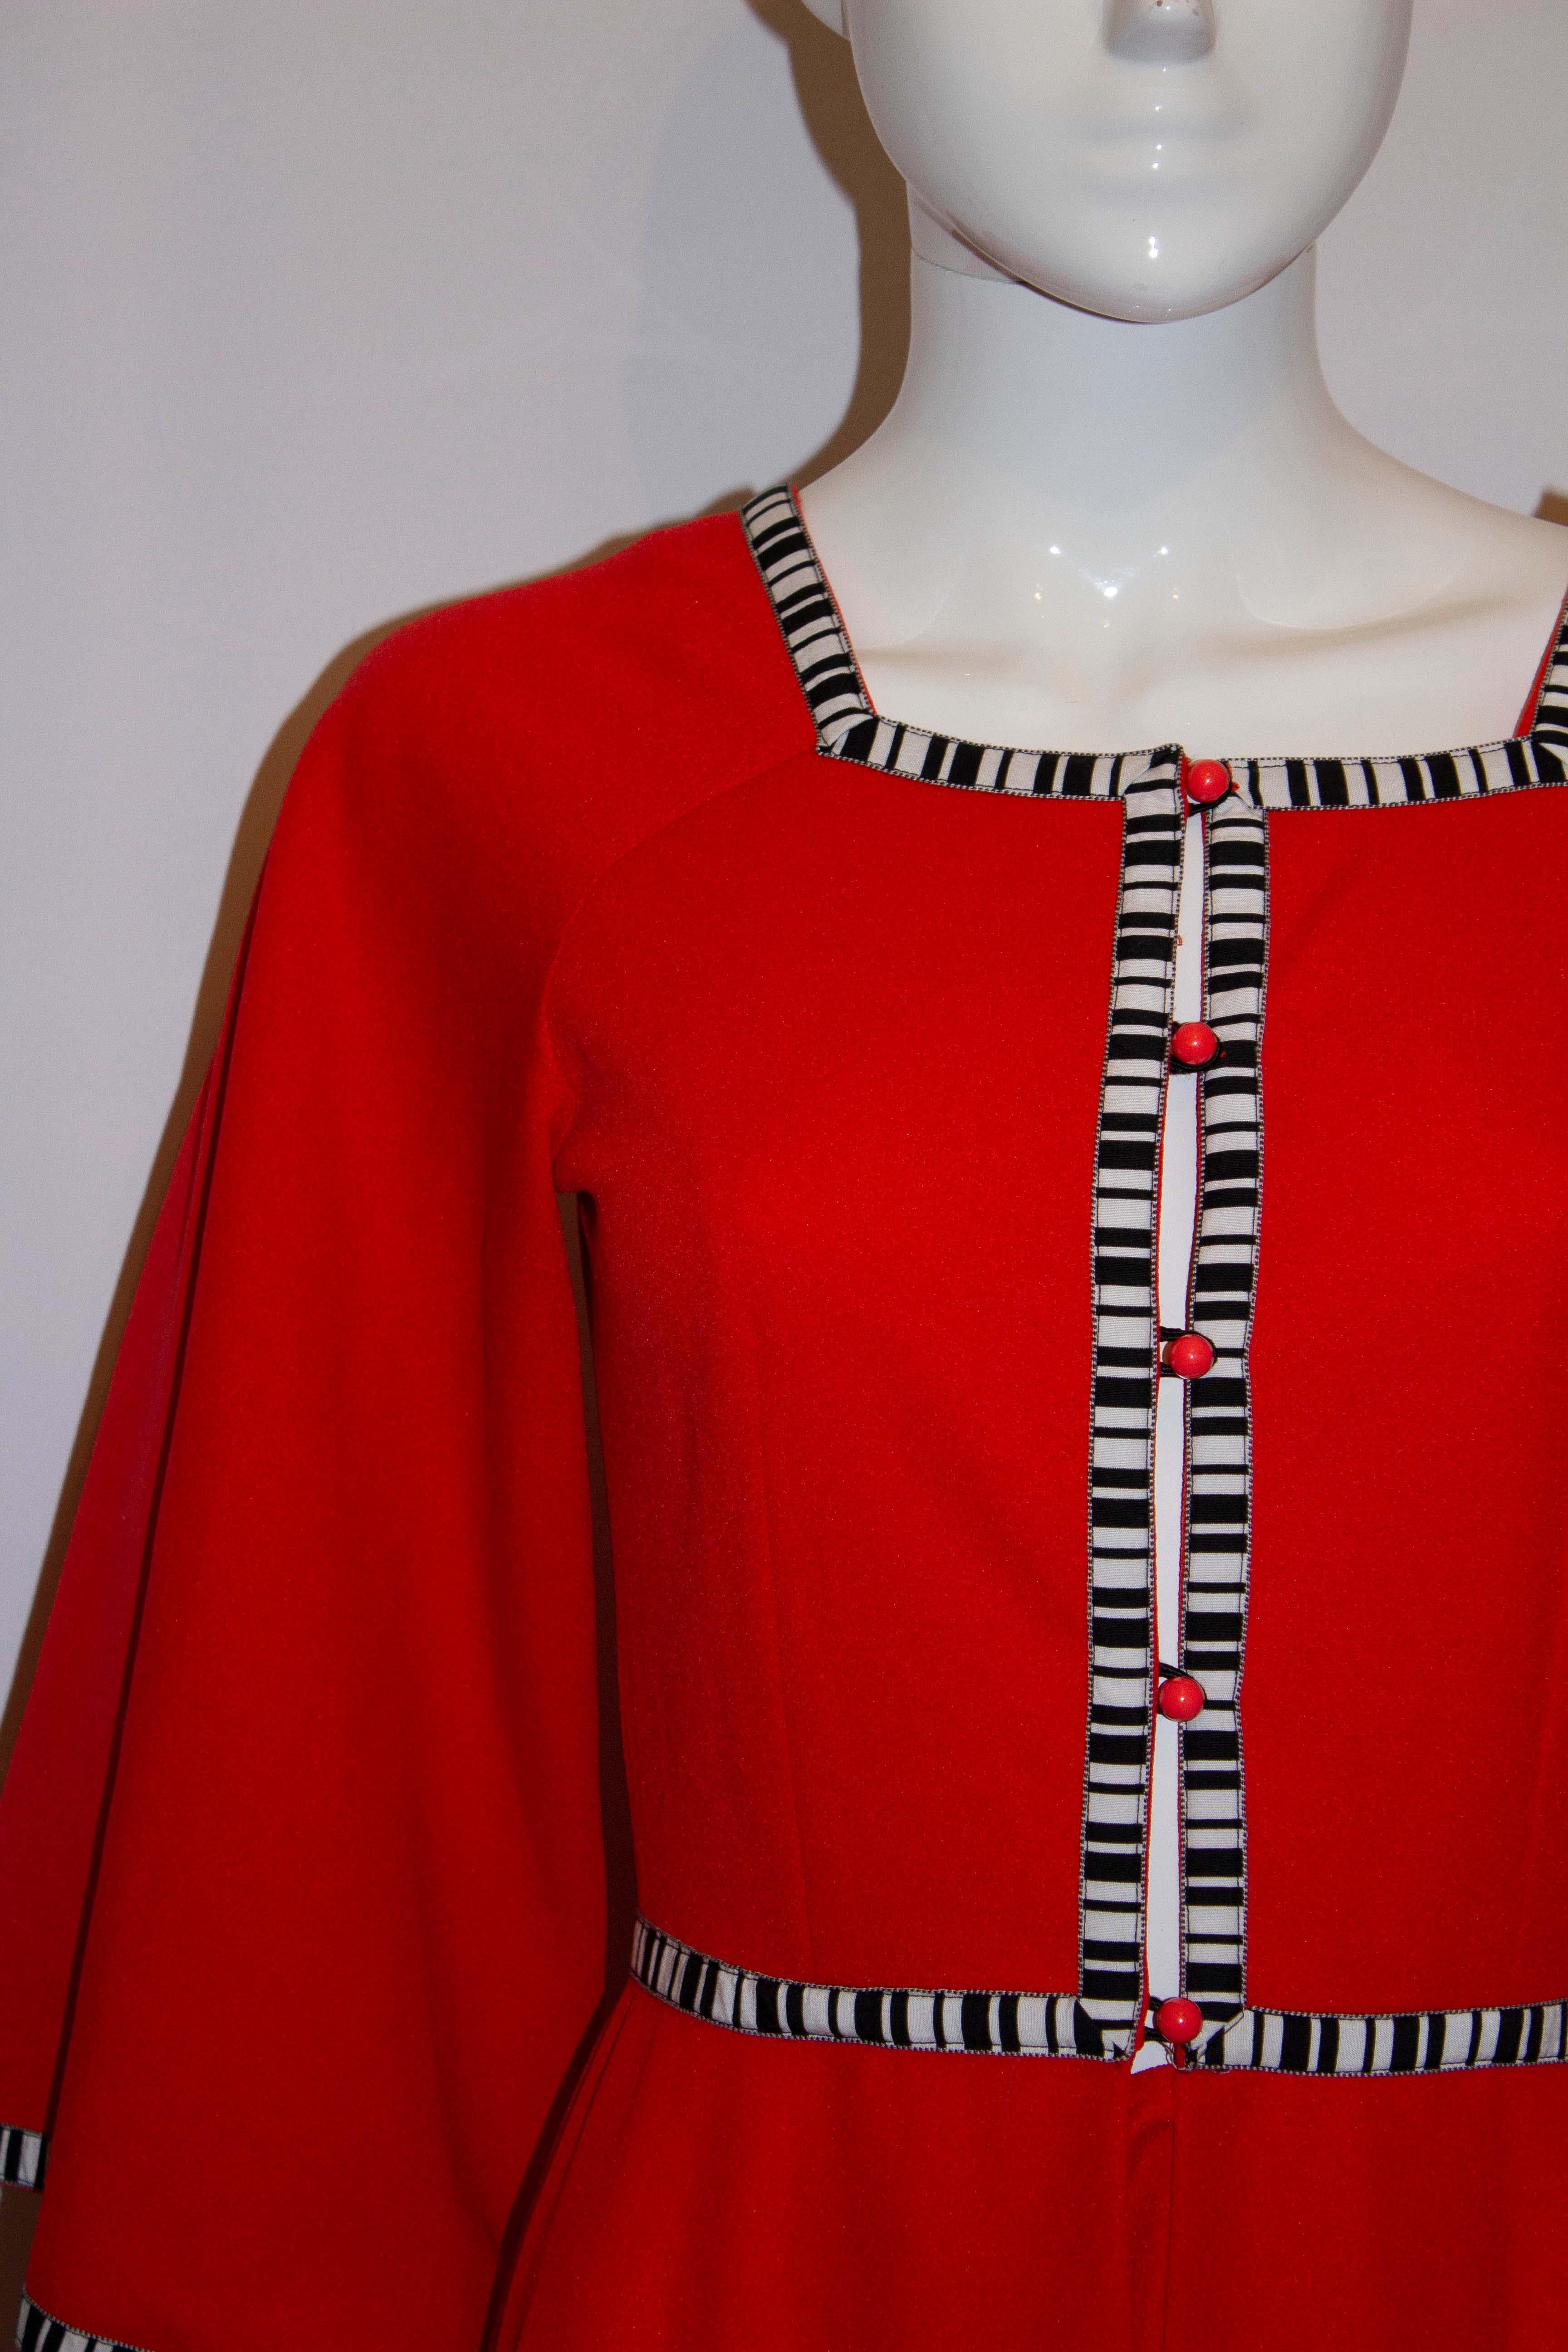 A headturning vintage dress by Simon Ellis . The dress is in a red jersey fabric , with black and white trim and a button opening at the front. Measurements: but 34'',length 58''